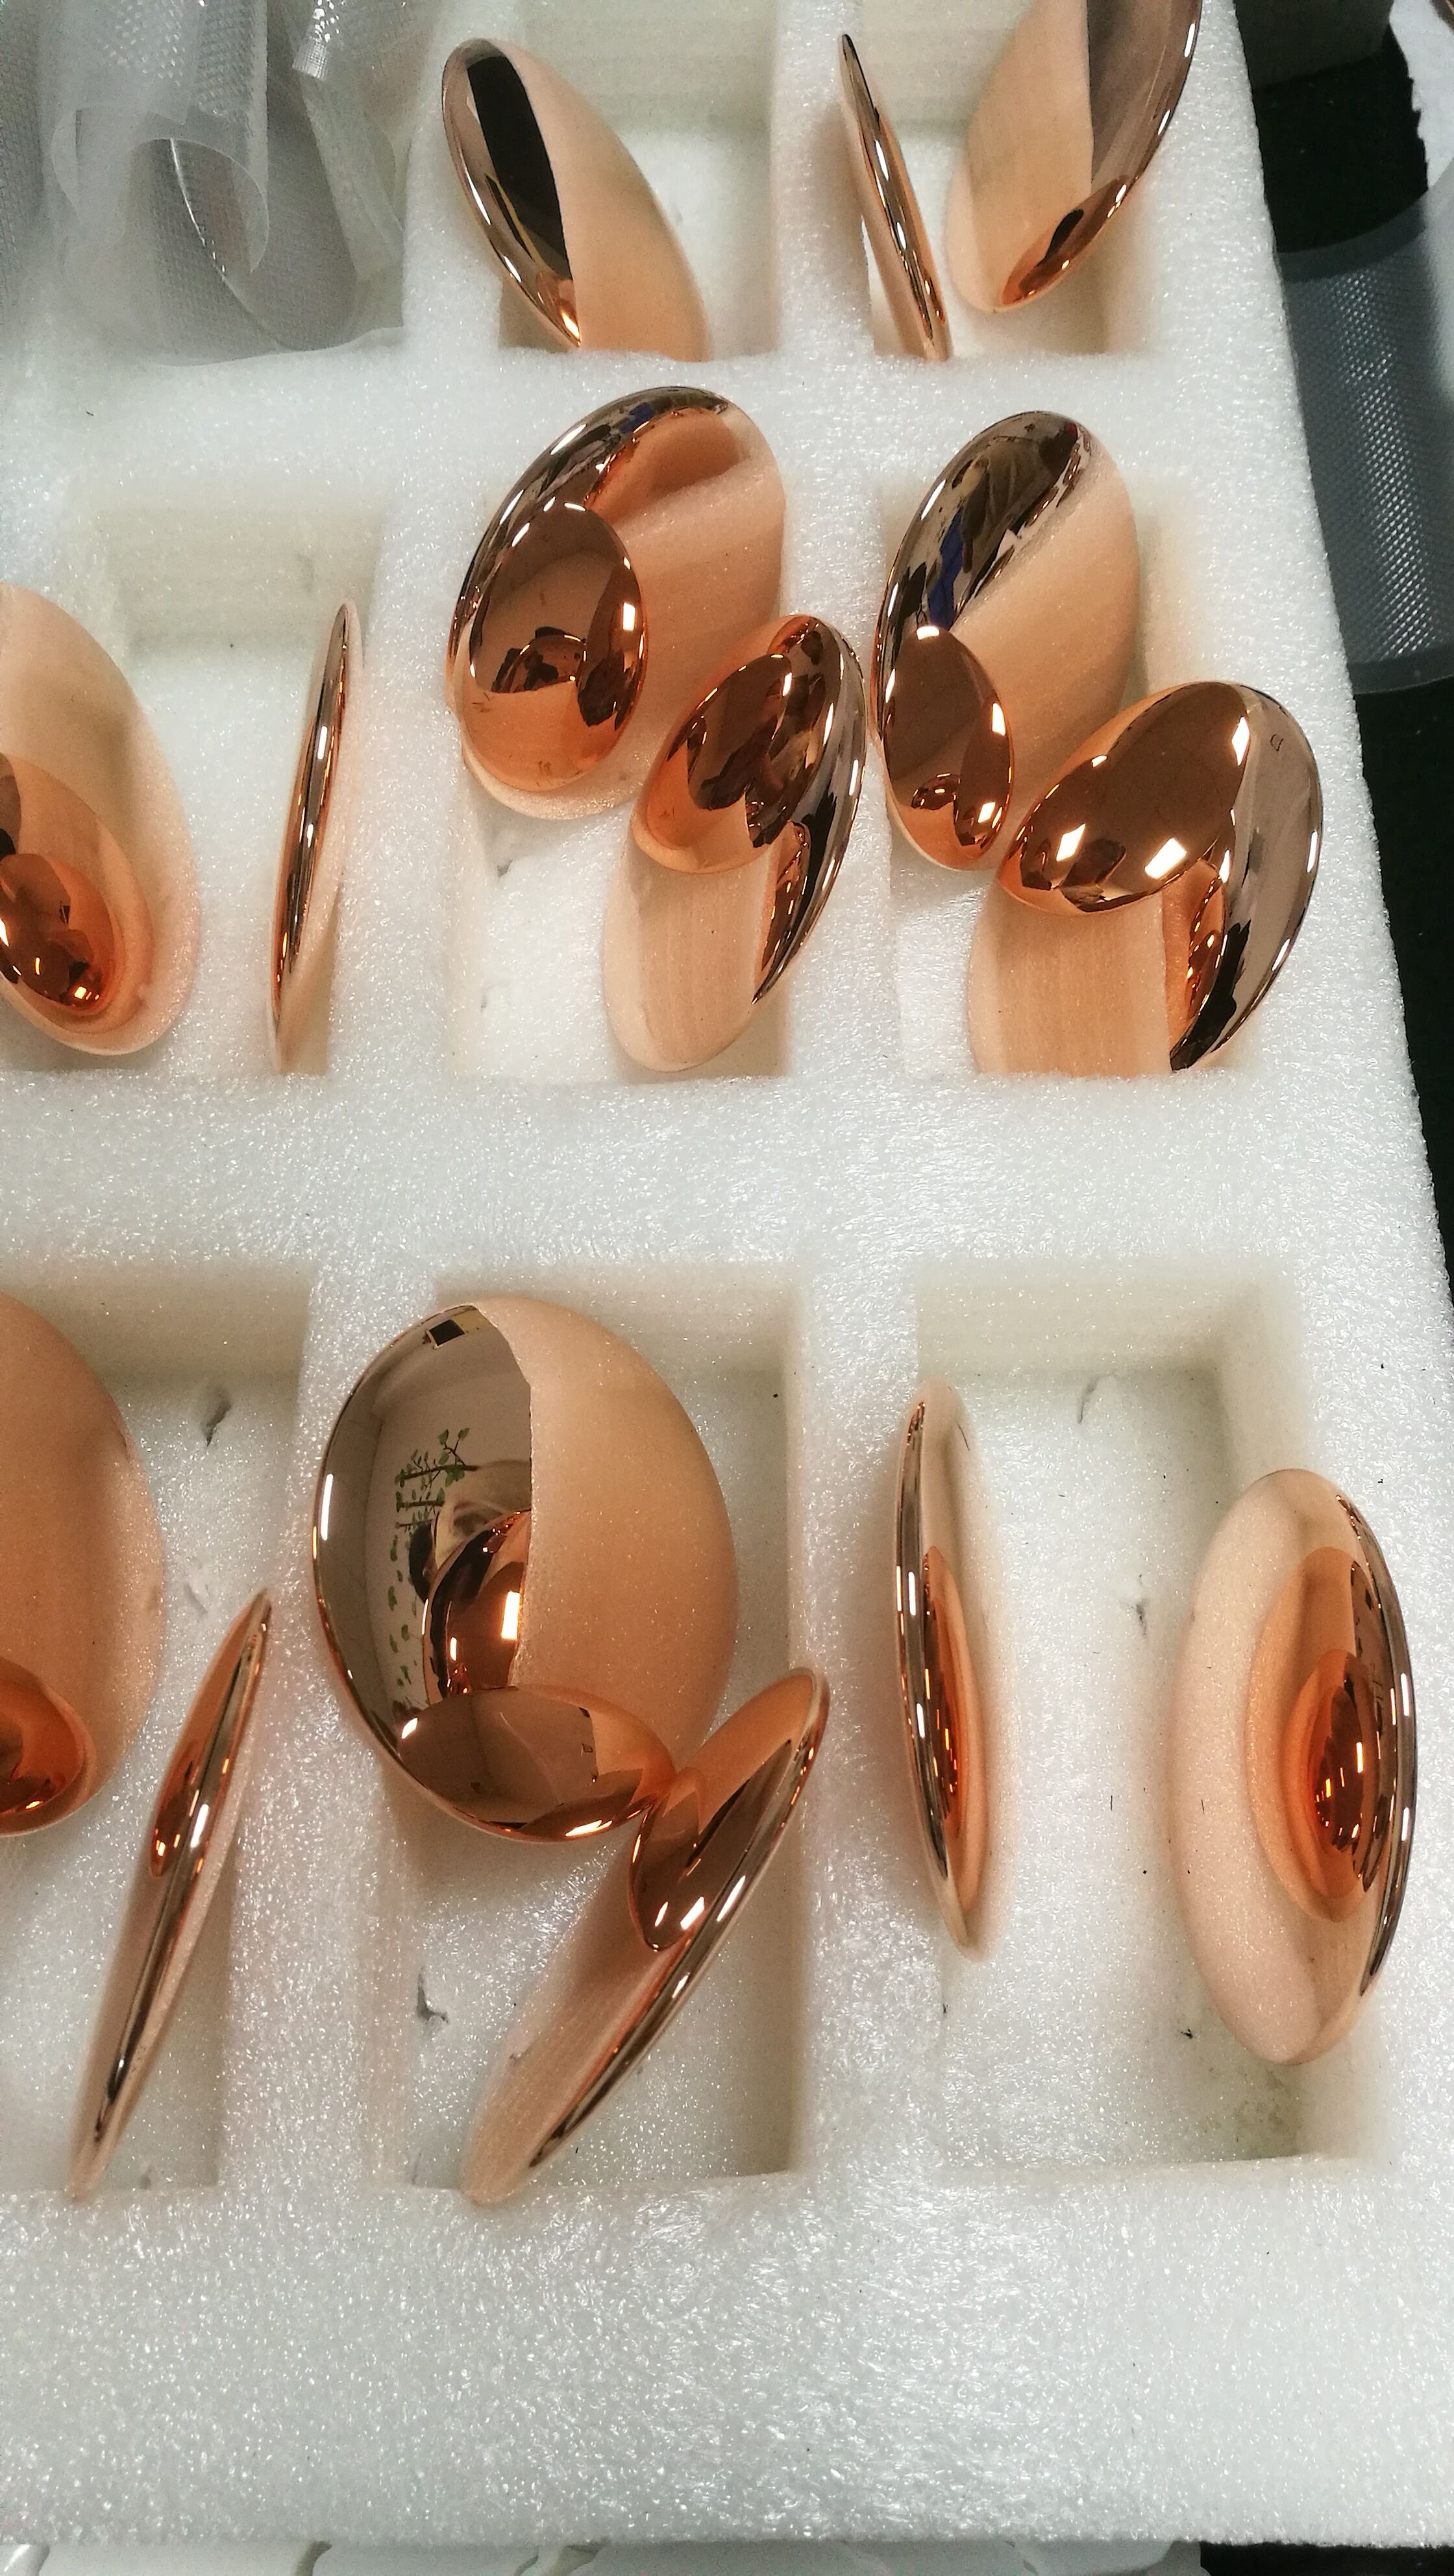 ODM CNC Machined Custom Made Copper Brass Ball Stress Relief Toys with Mirror Polishing